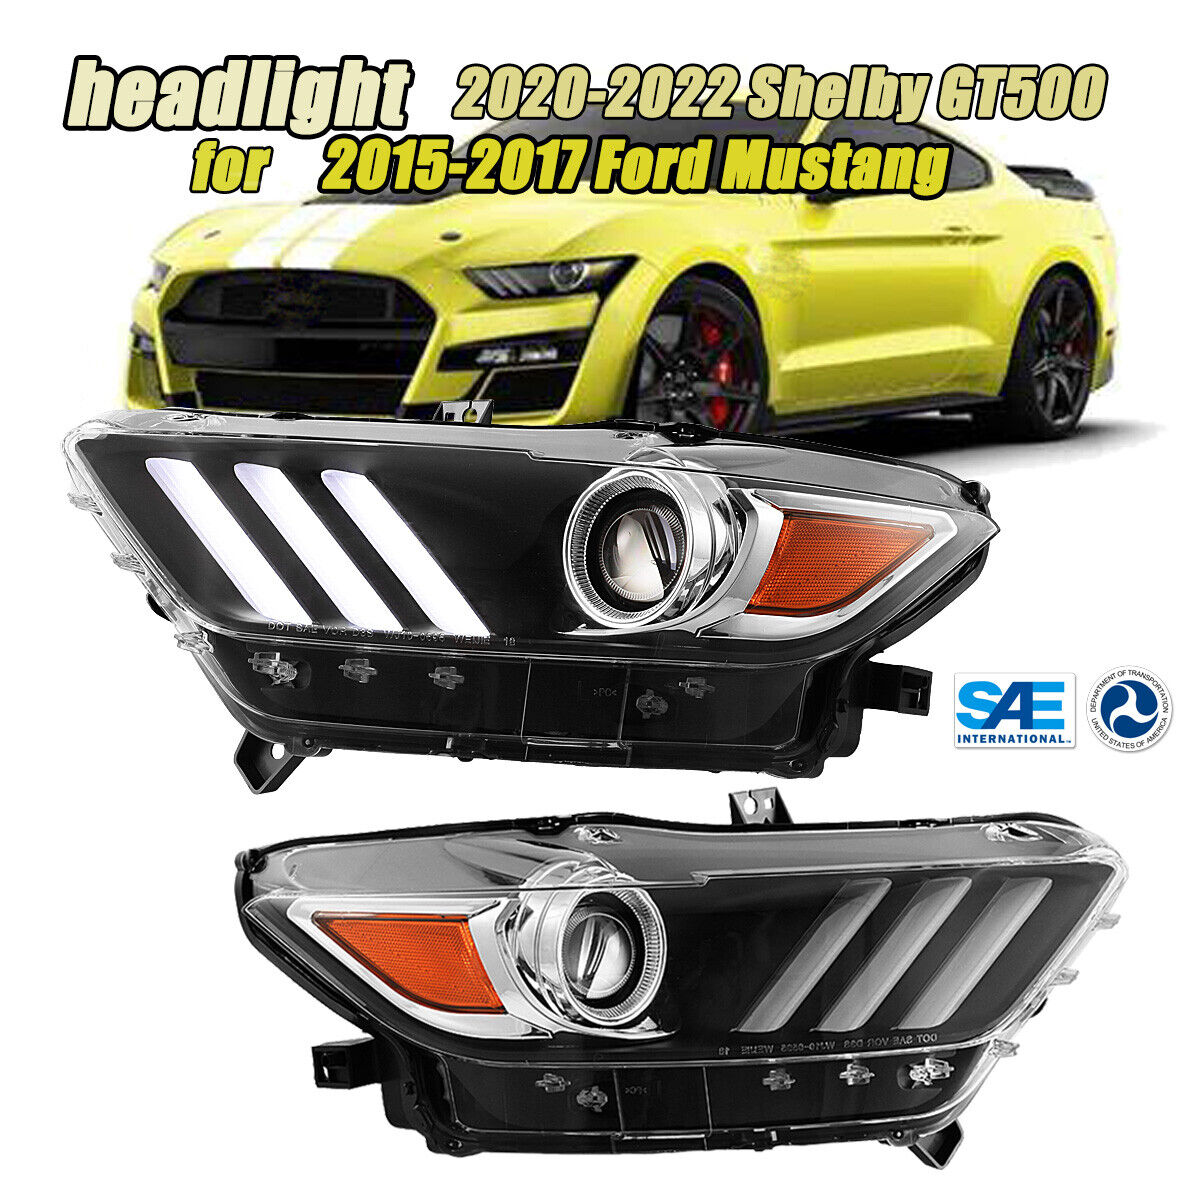 Headlights 2015-2017 Ford Mustang HID Xenon LED Headlamp 2020-2022 Shelby GT500